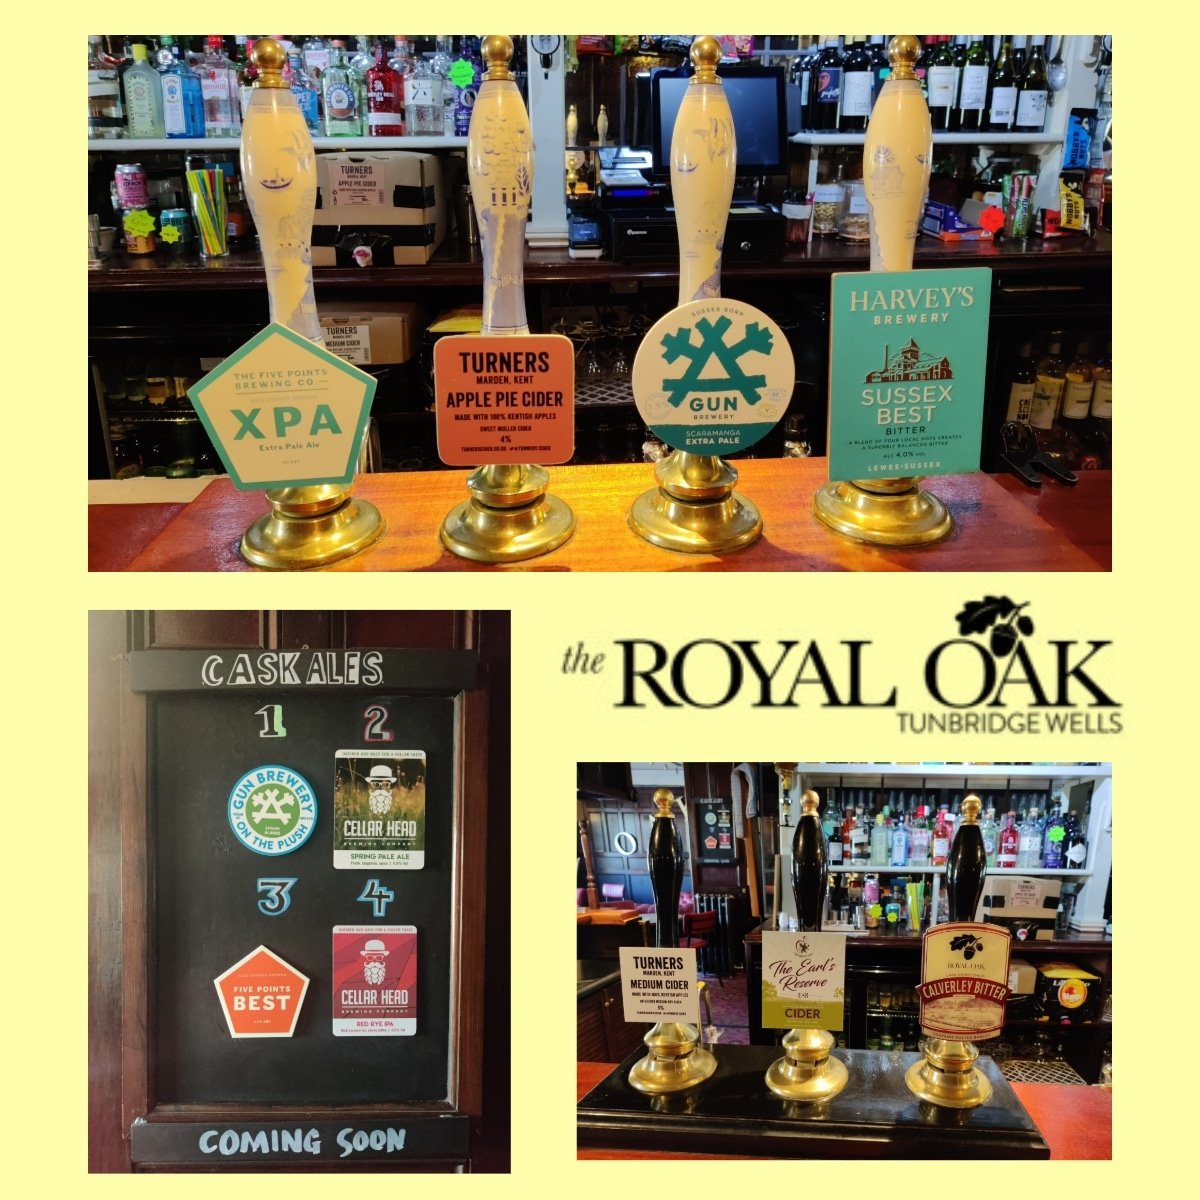 Today's cask ales now pouring and our coming soon board. OPEN from 4pm #harveysbrewery #fivepointsbrewingco ##westkentcamra #calverleybitter #gunbrewery #twpubs #realale #realalefinder #❤️🌳🍺